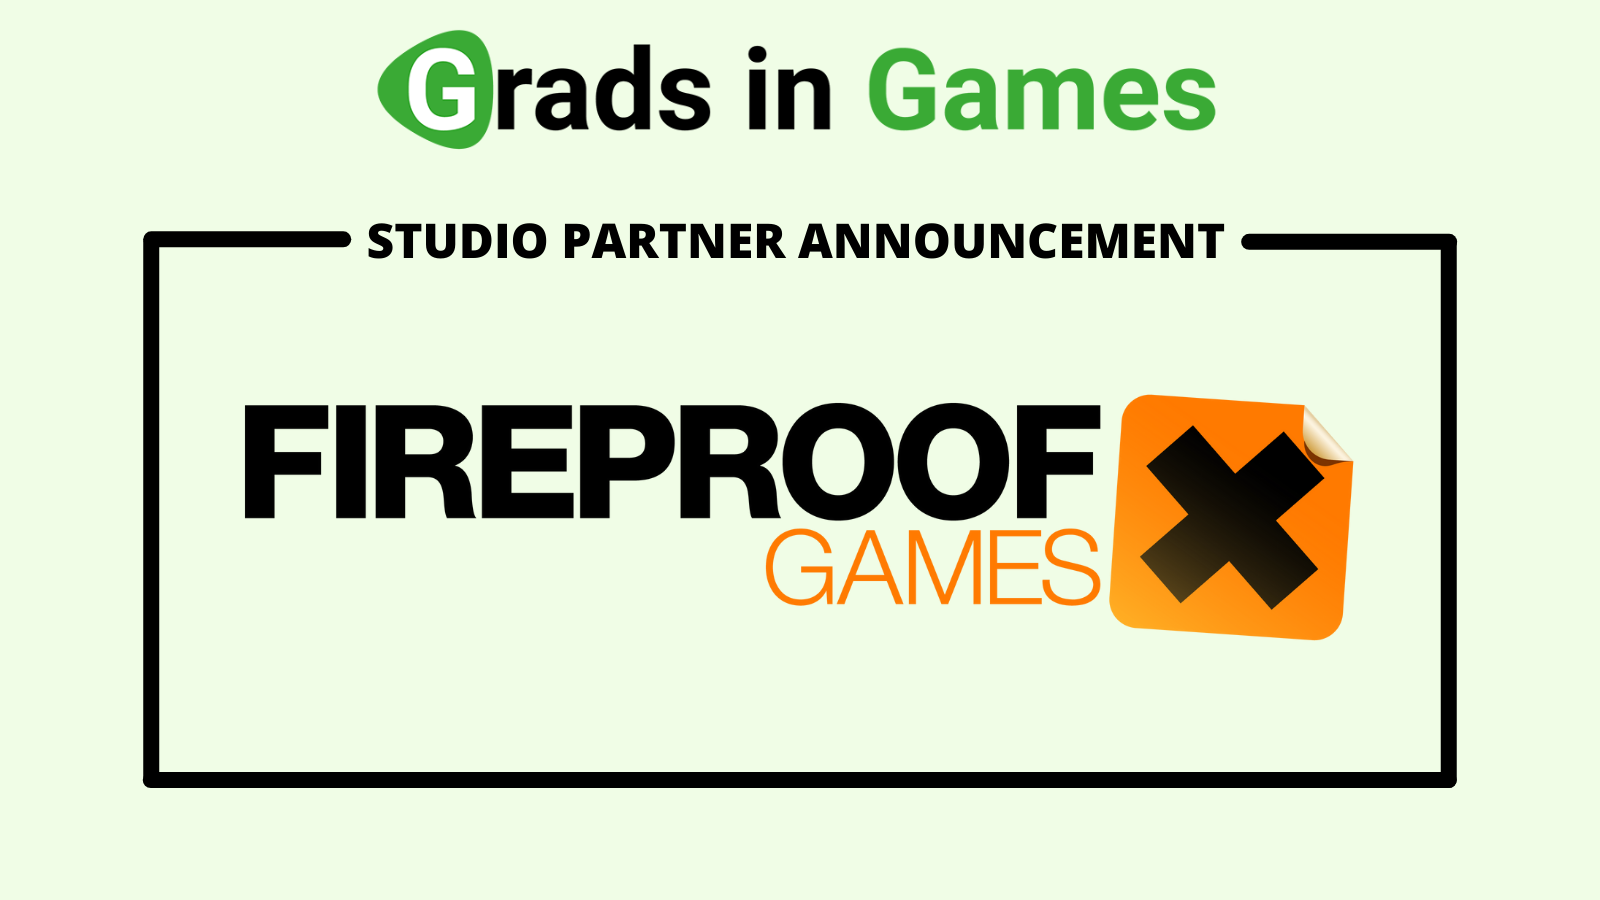 Grads In Games welcomes Fireproof Games as studio partner for 2021/22